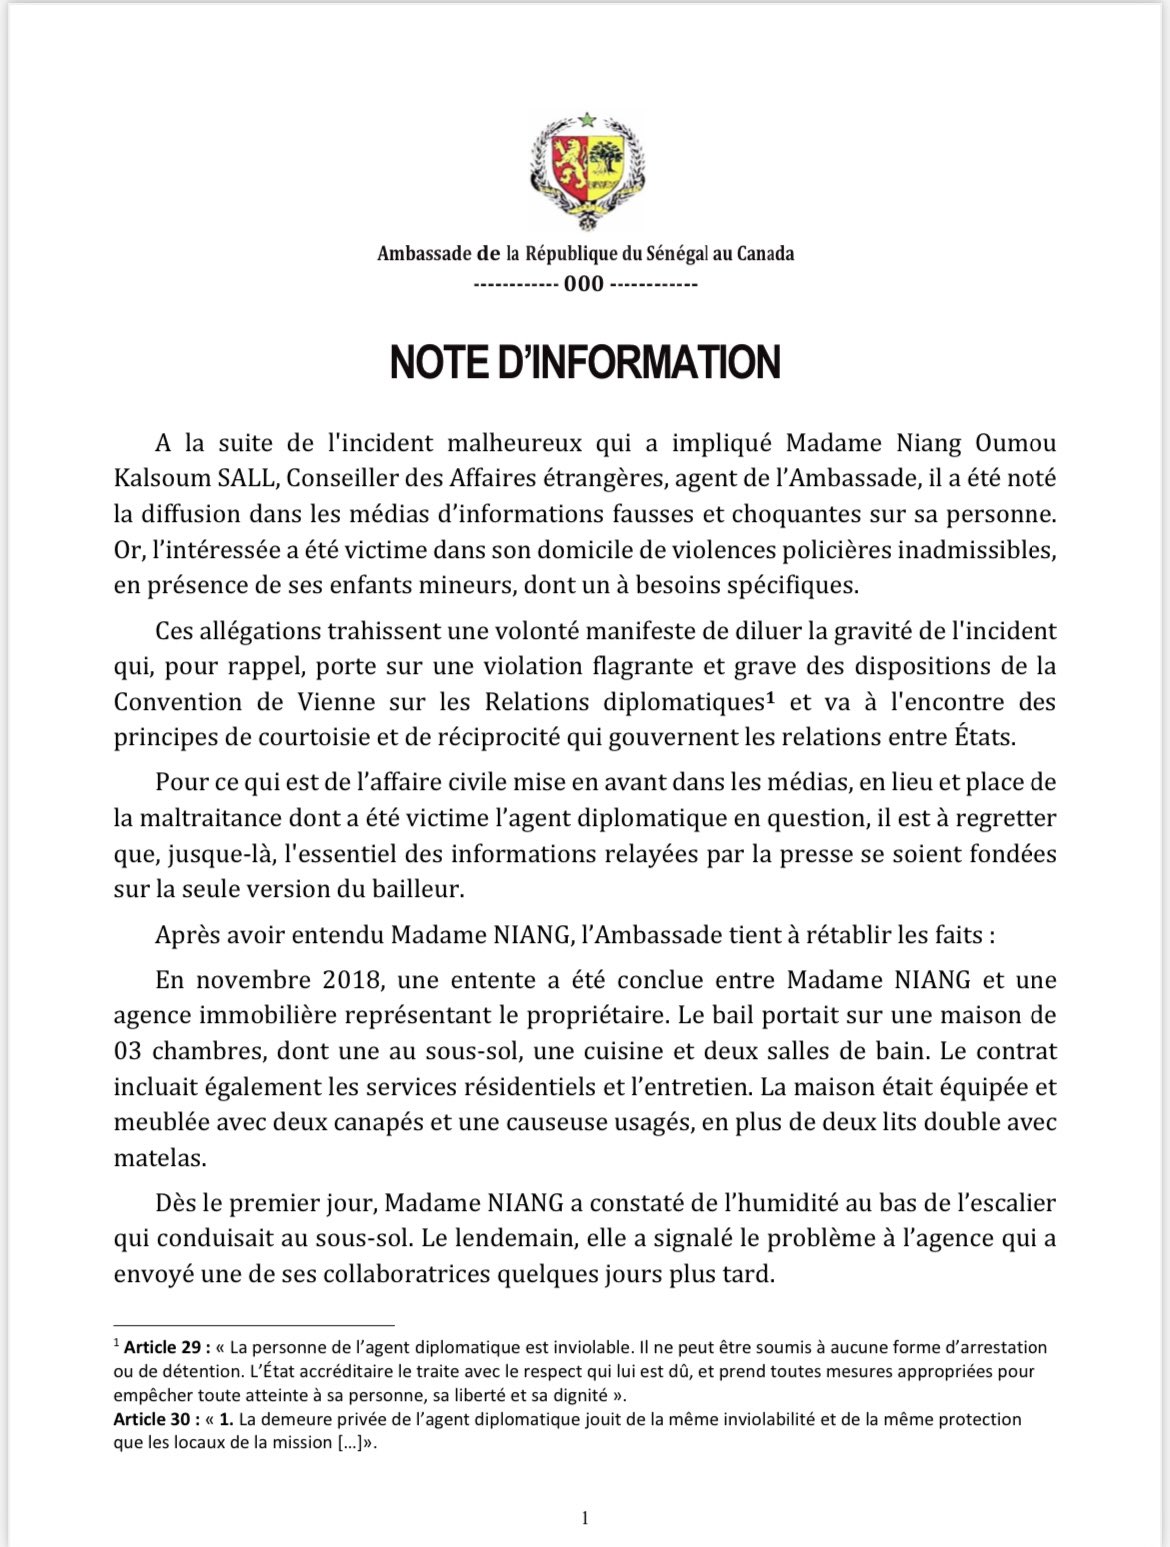 Case of Senegalese diplomat: The Senegalese Embassy in Canada regrets “the dissemination of false and shocking information” and provides its version of the facts.